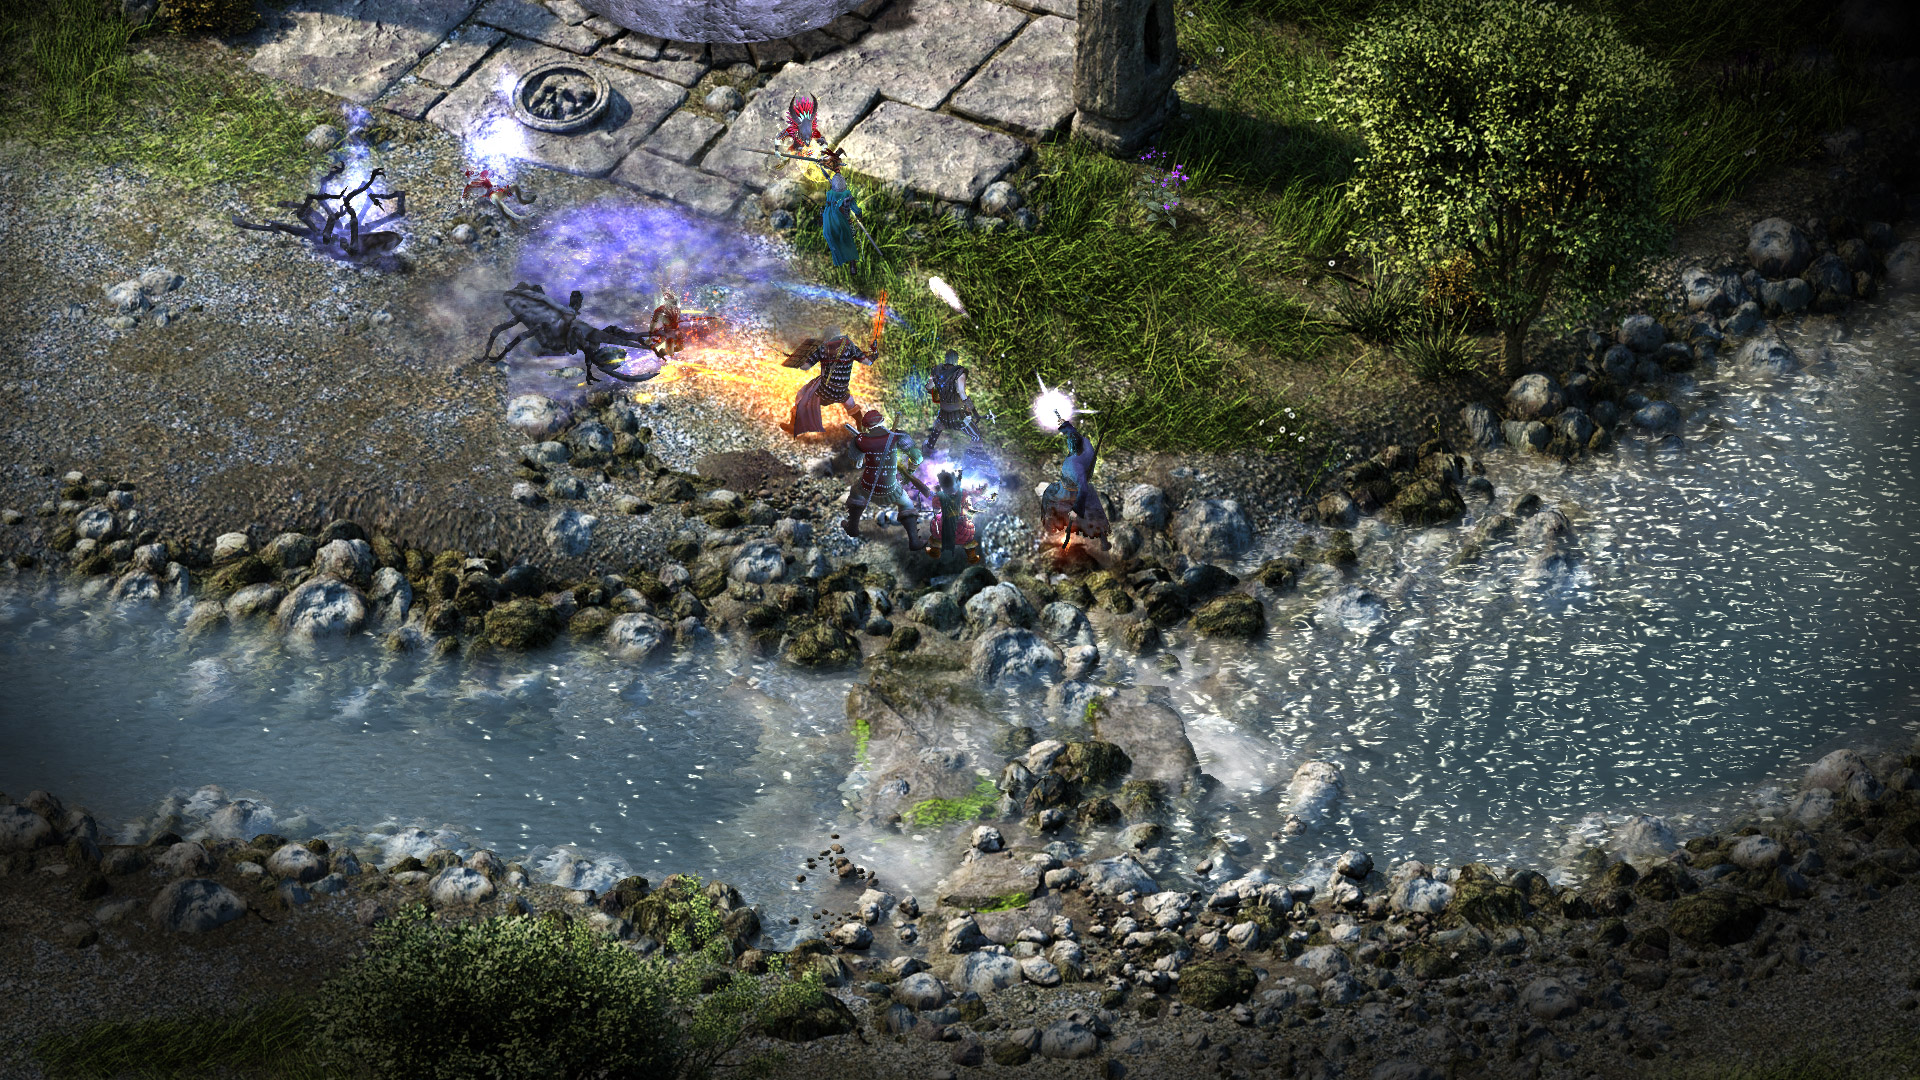 Pillars of Eternity PS4 review